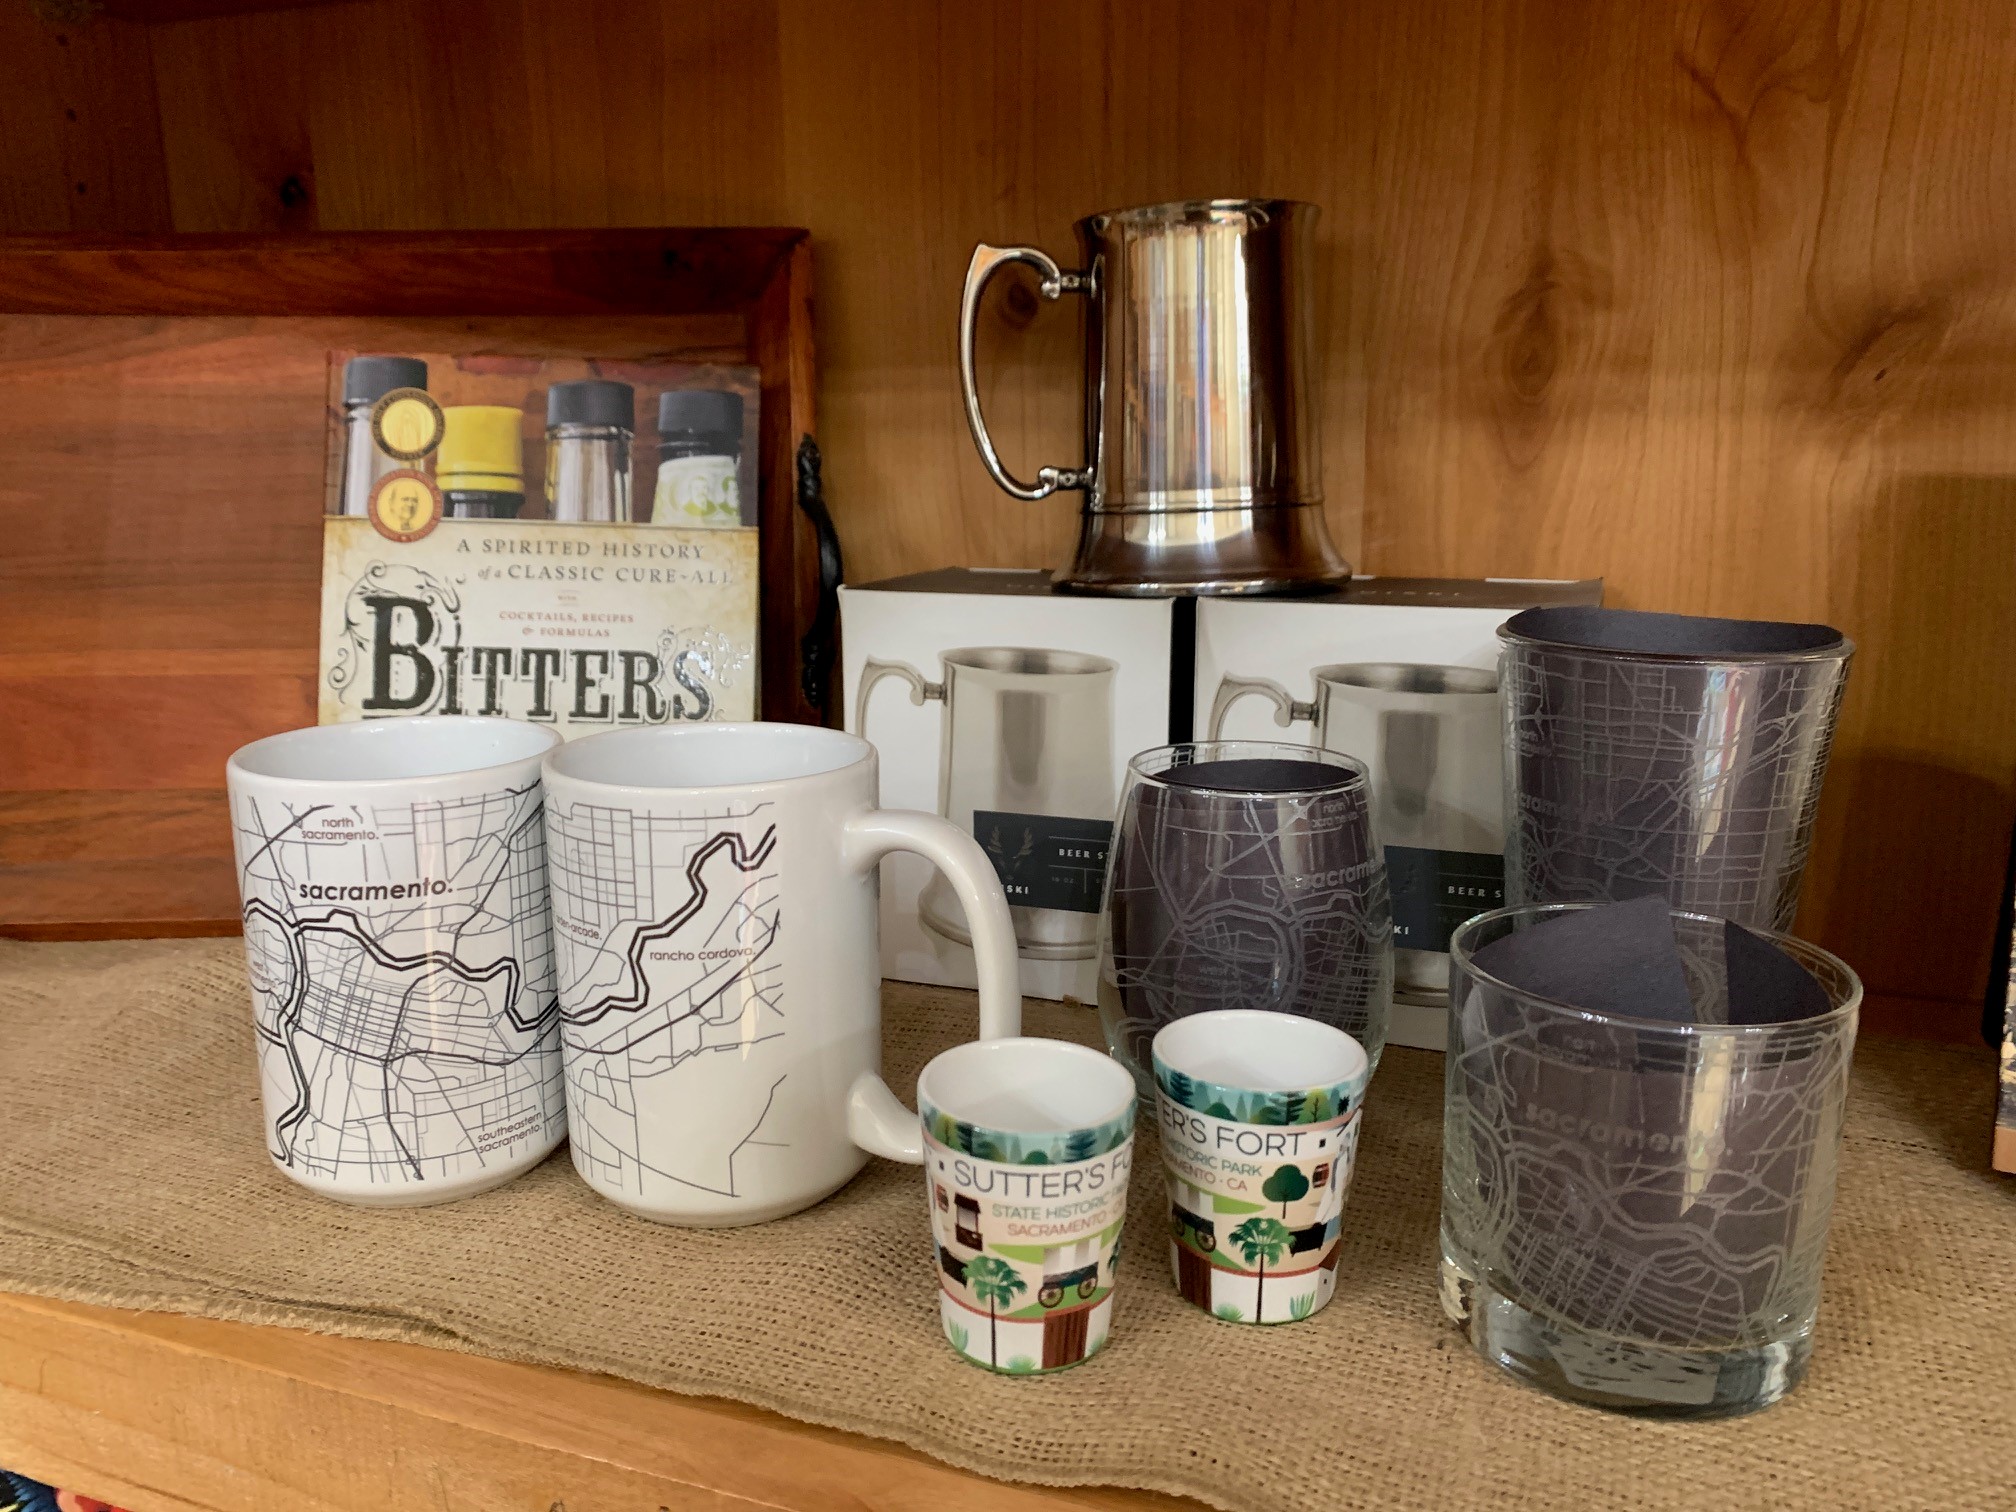 a retail display shelf featuring assorted mugs, glasses, and books